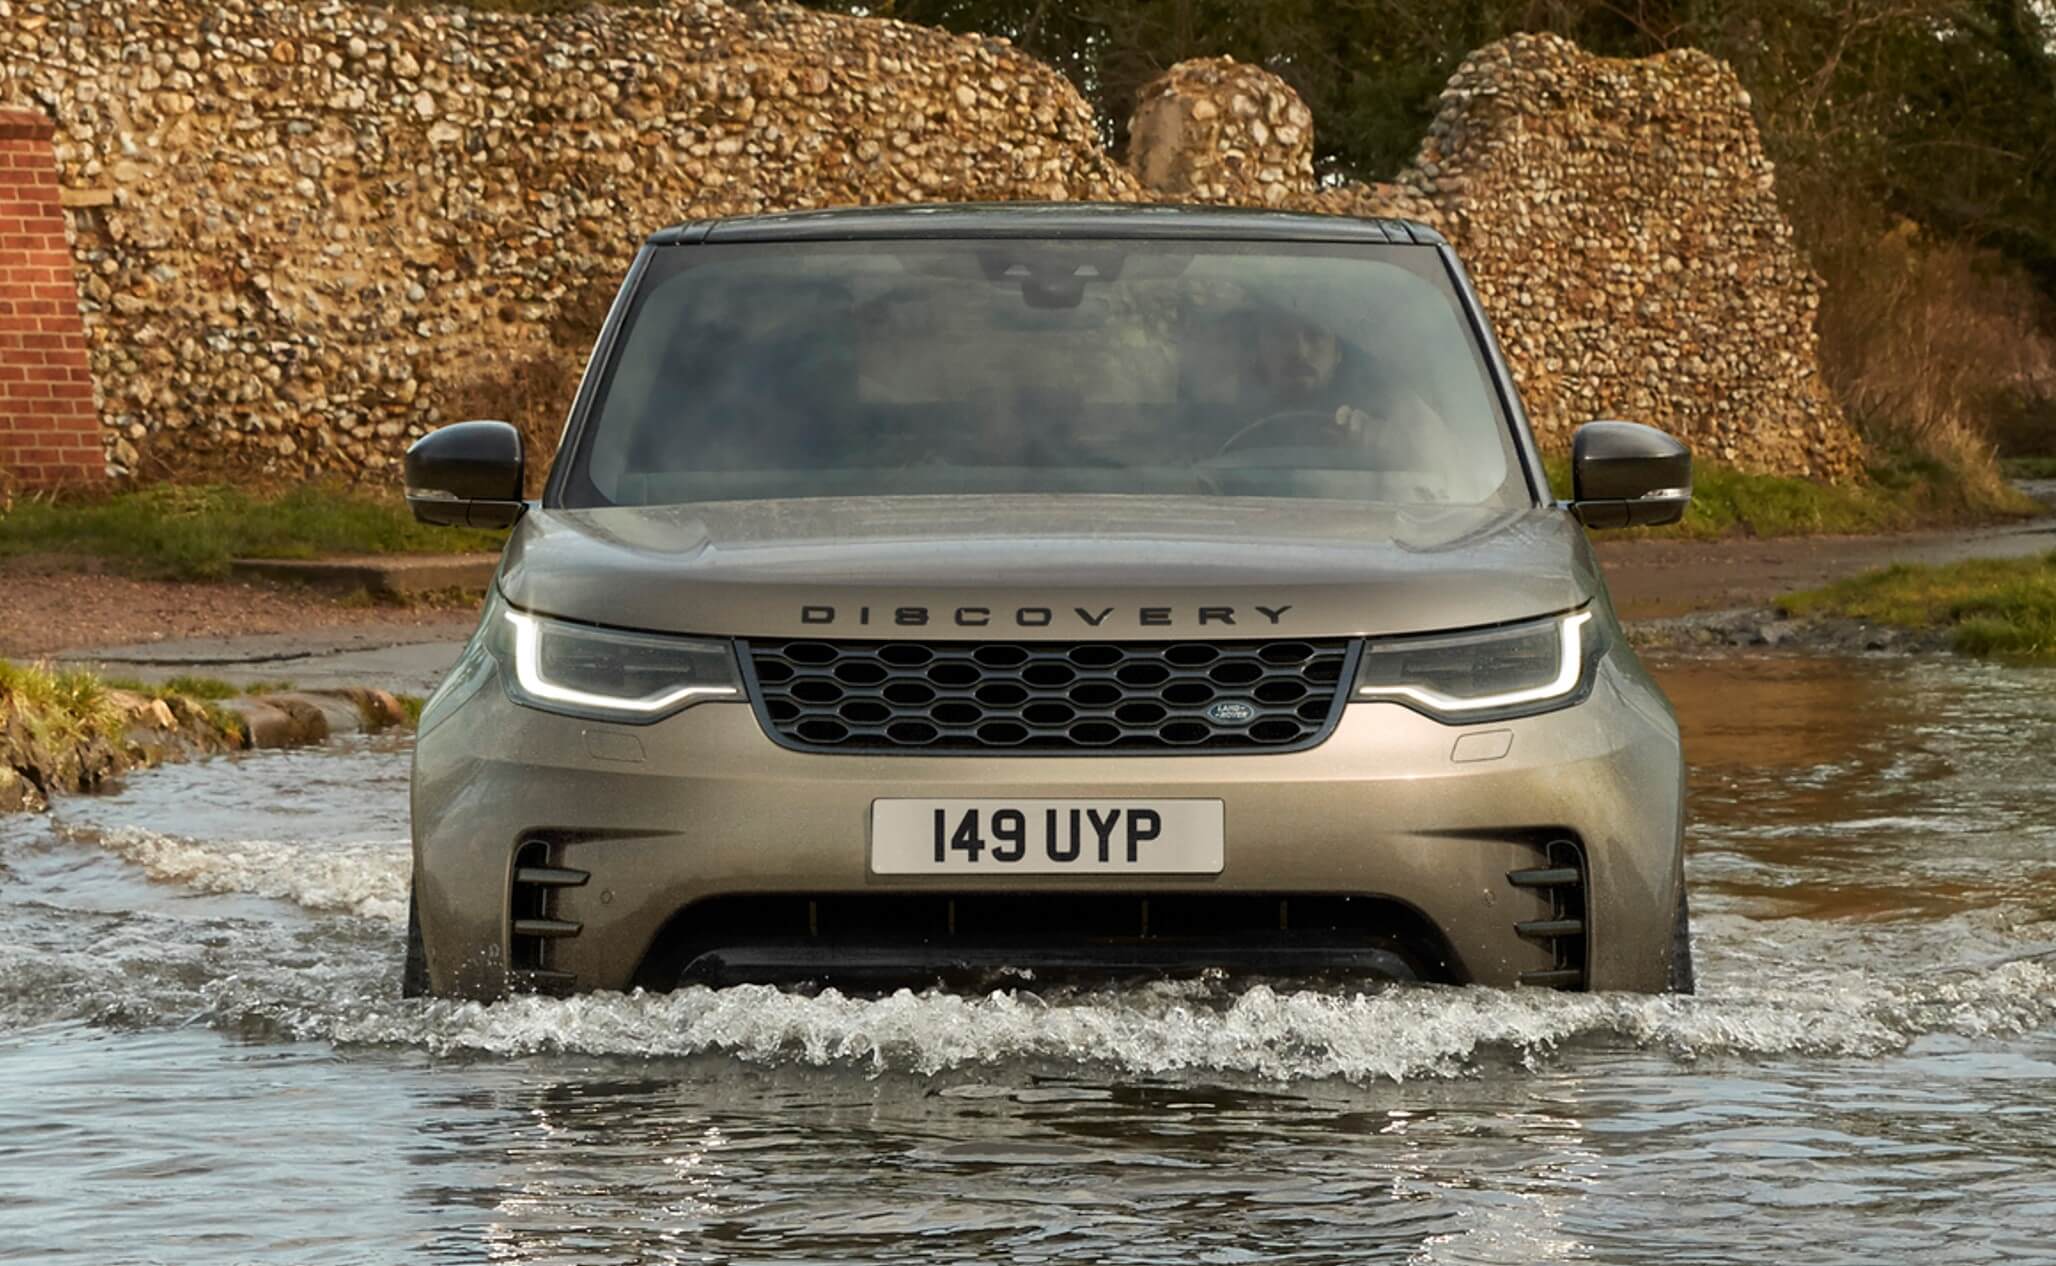 aria-label="Land ROver Discovery 1"